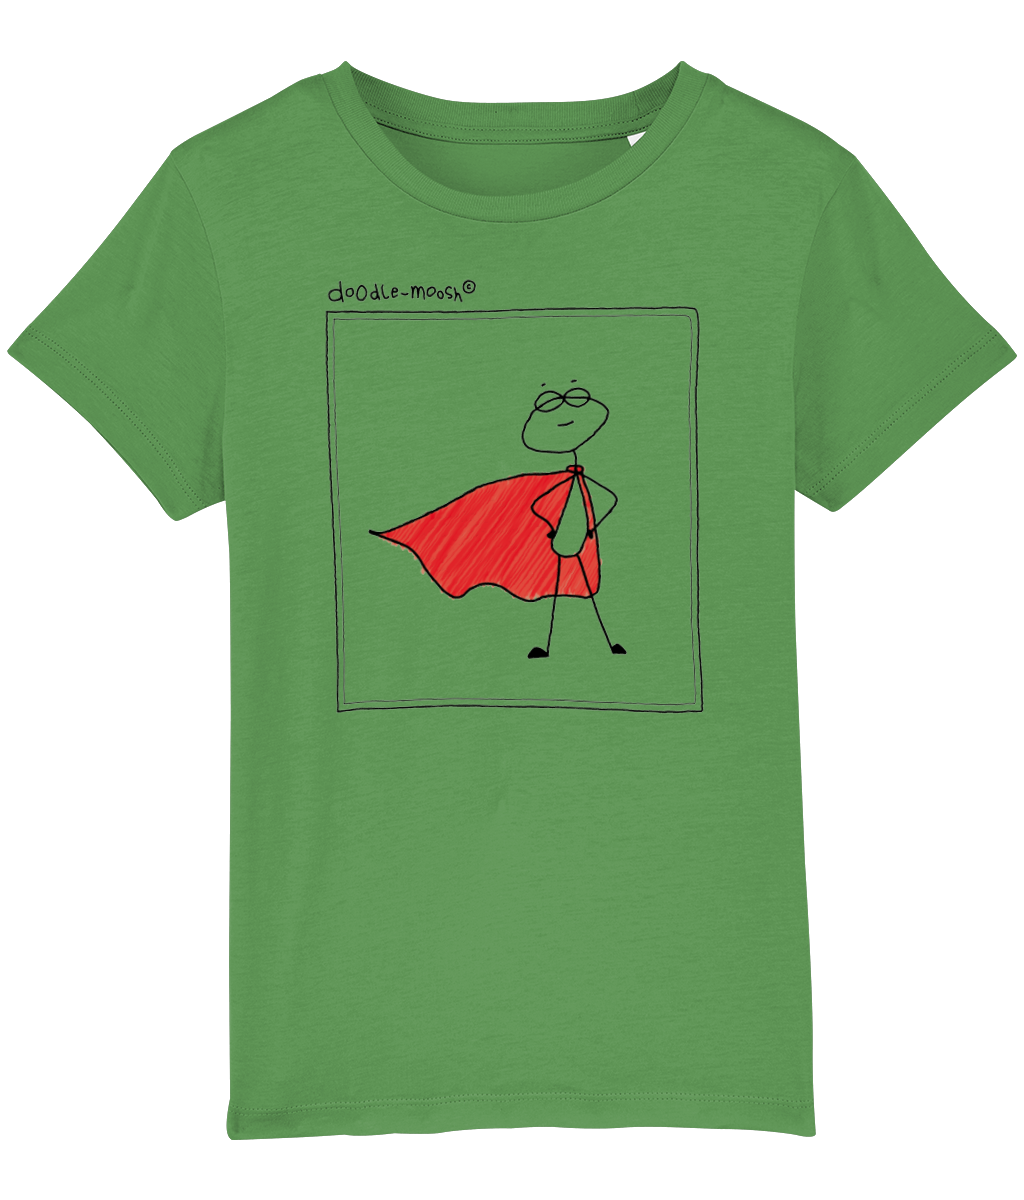 superpower t-shirt, green with black, colorful drawing